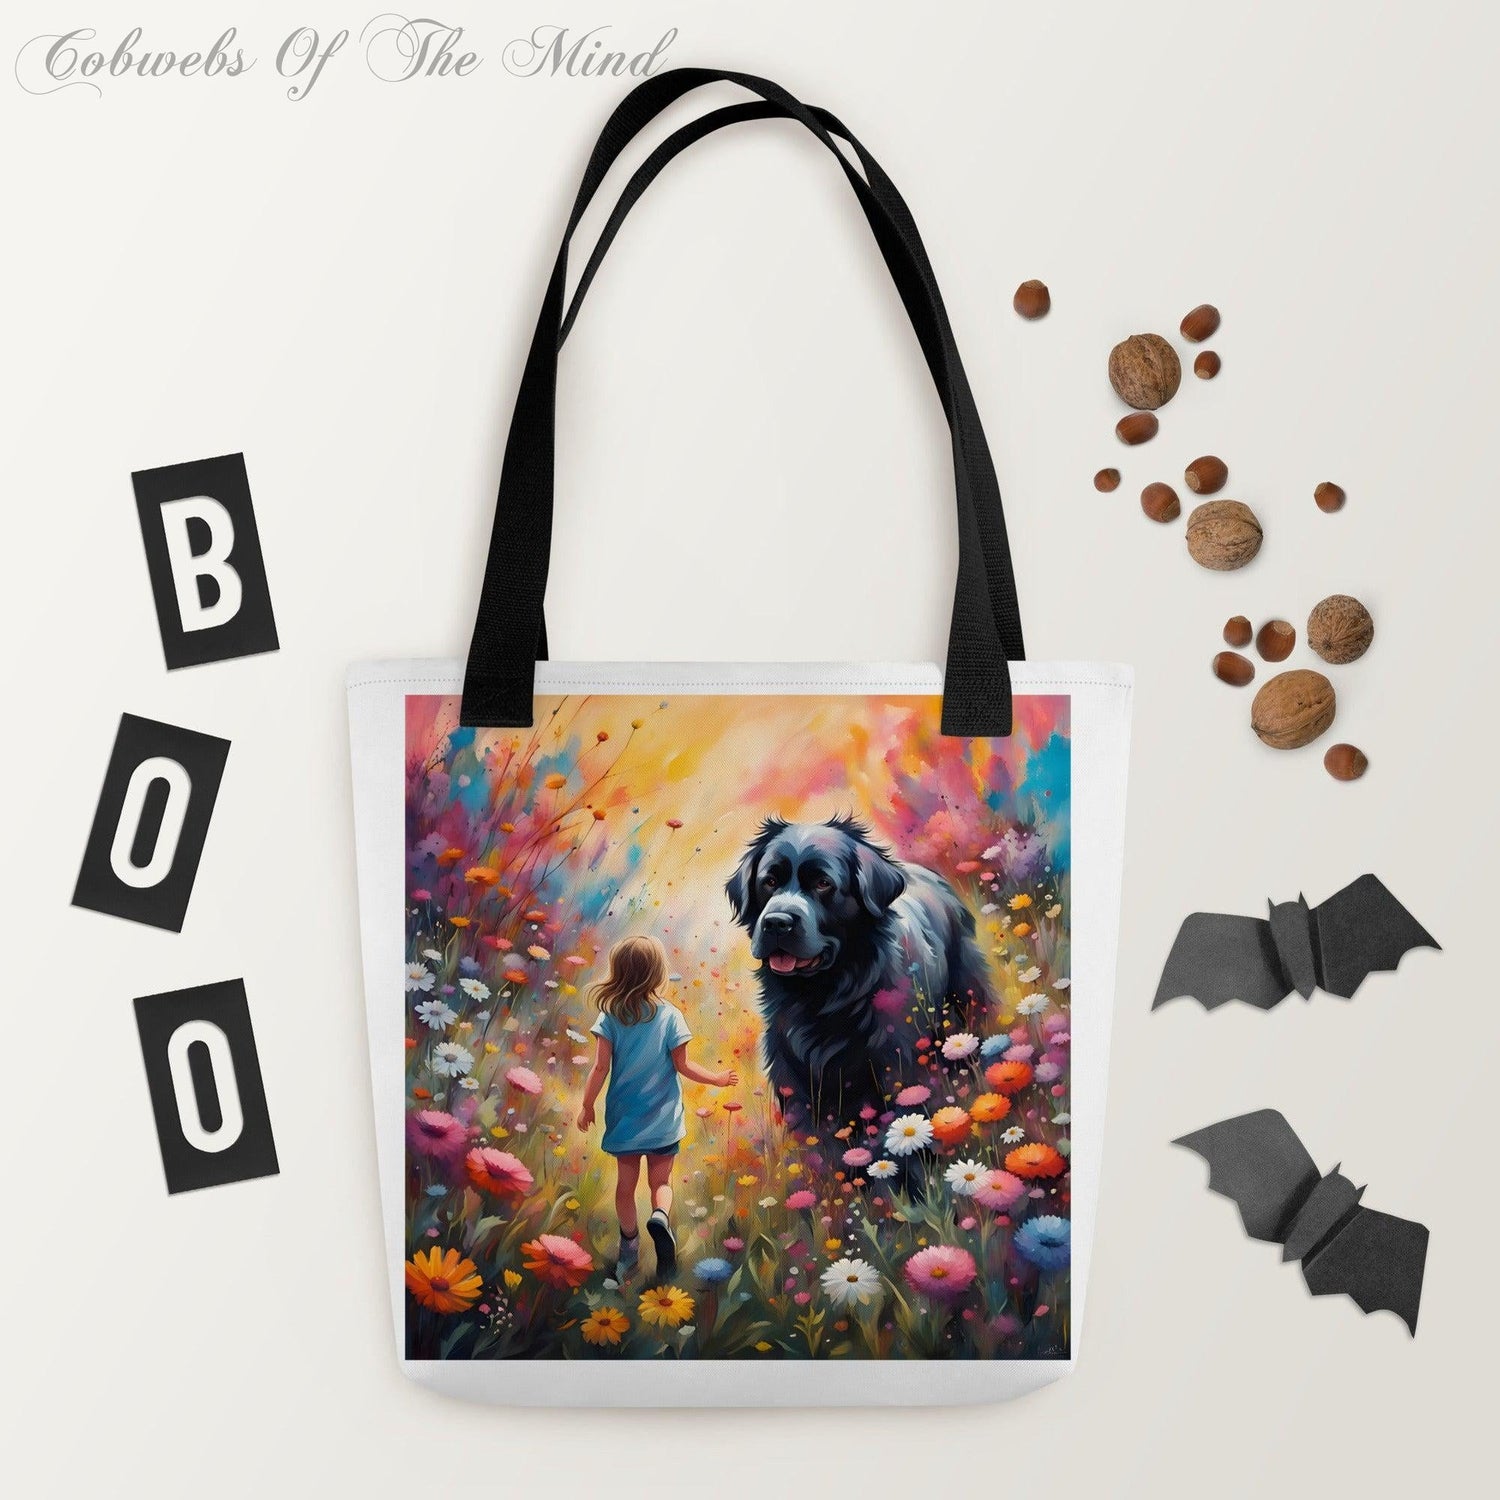 Tote Bags - Cobwebs Of The Mind 